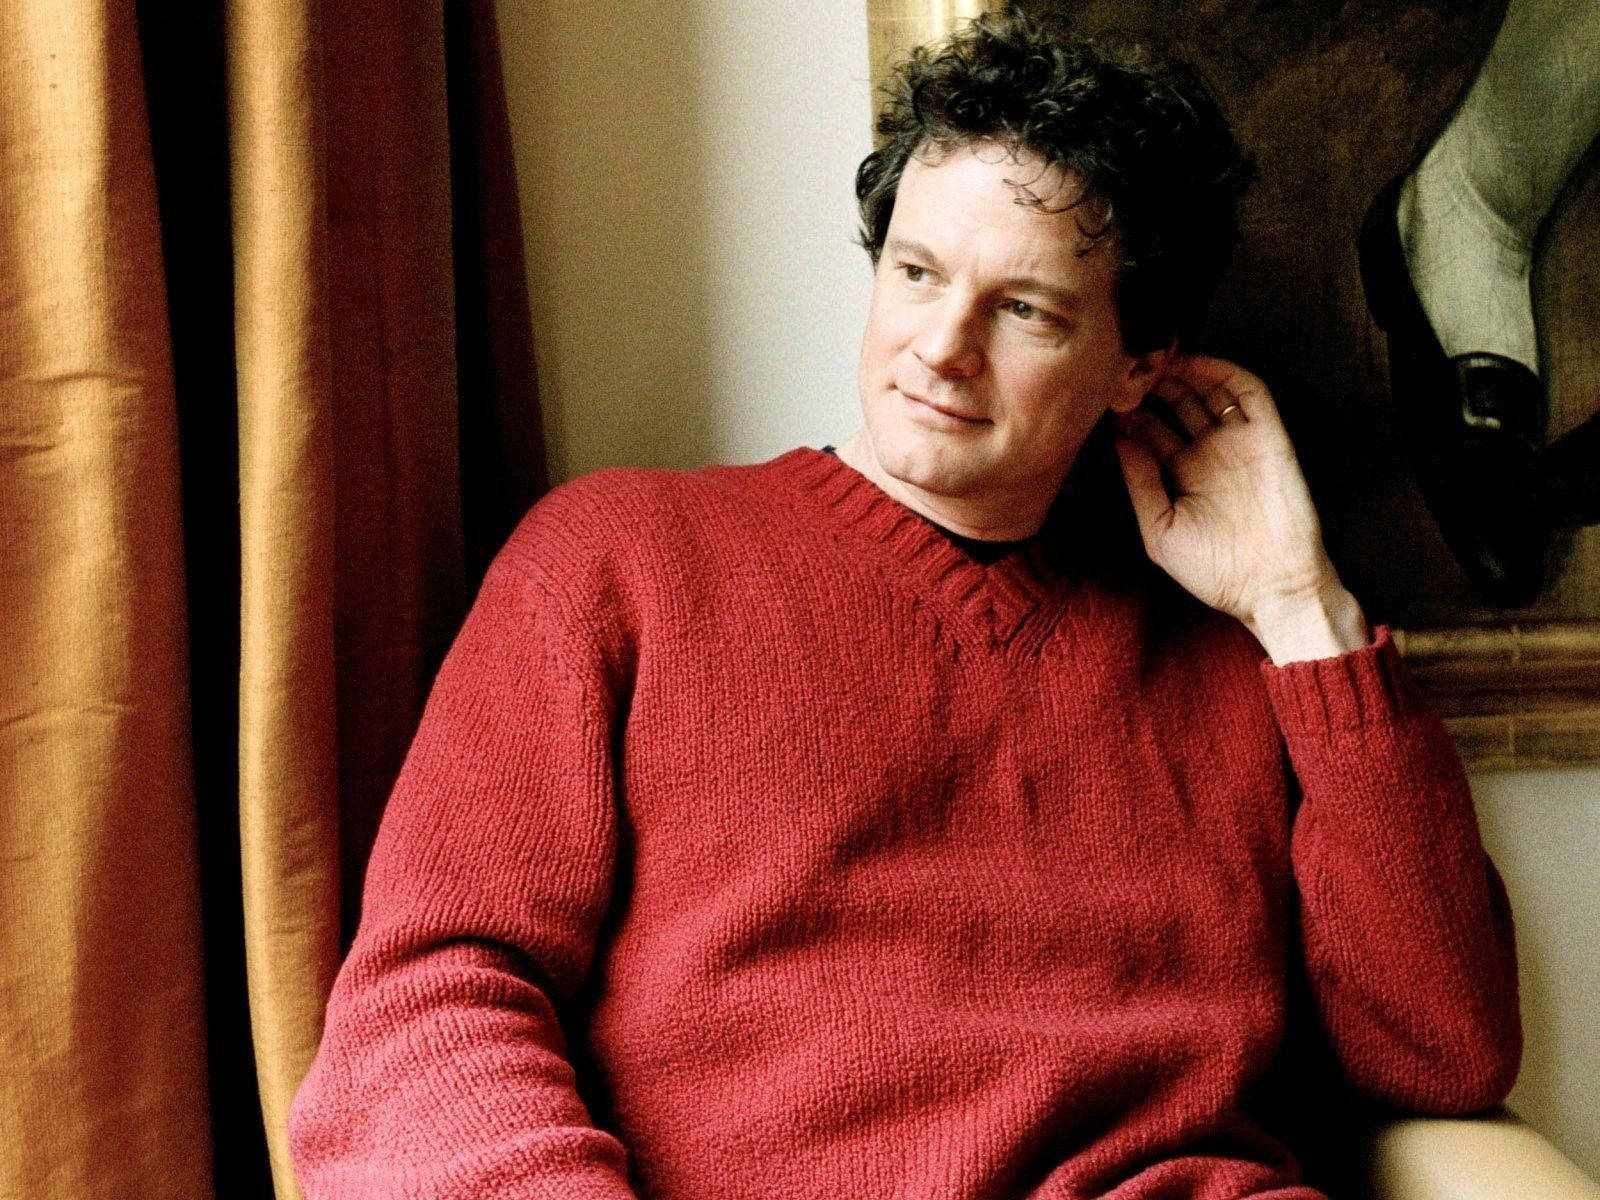 Caption: British Actor Colin Firth In Photoshoot Wallpaper